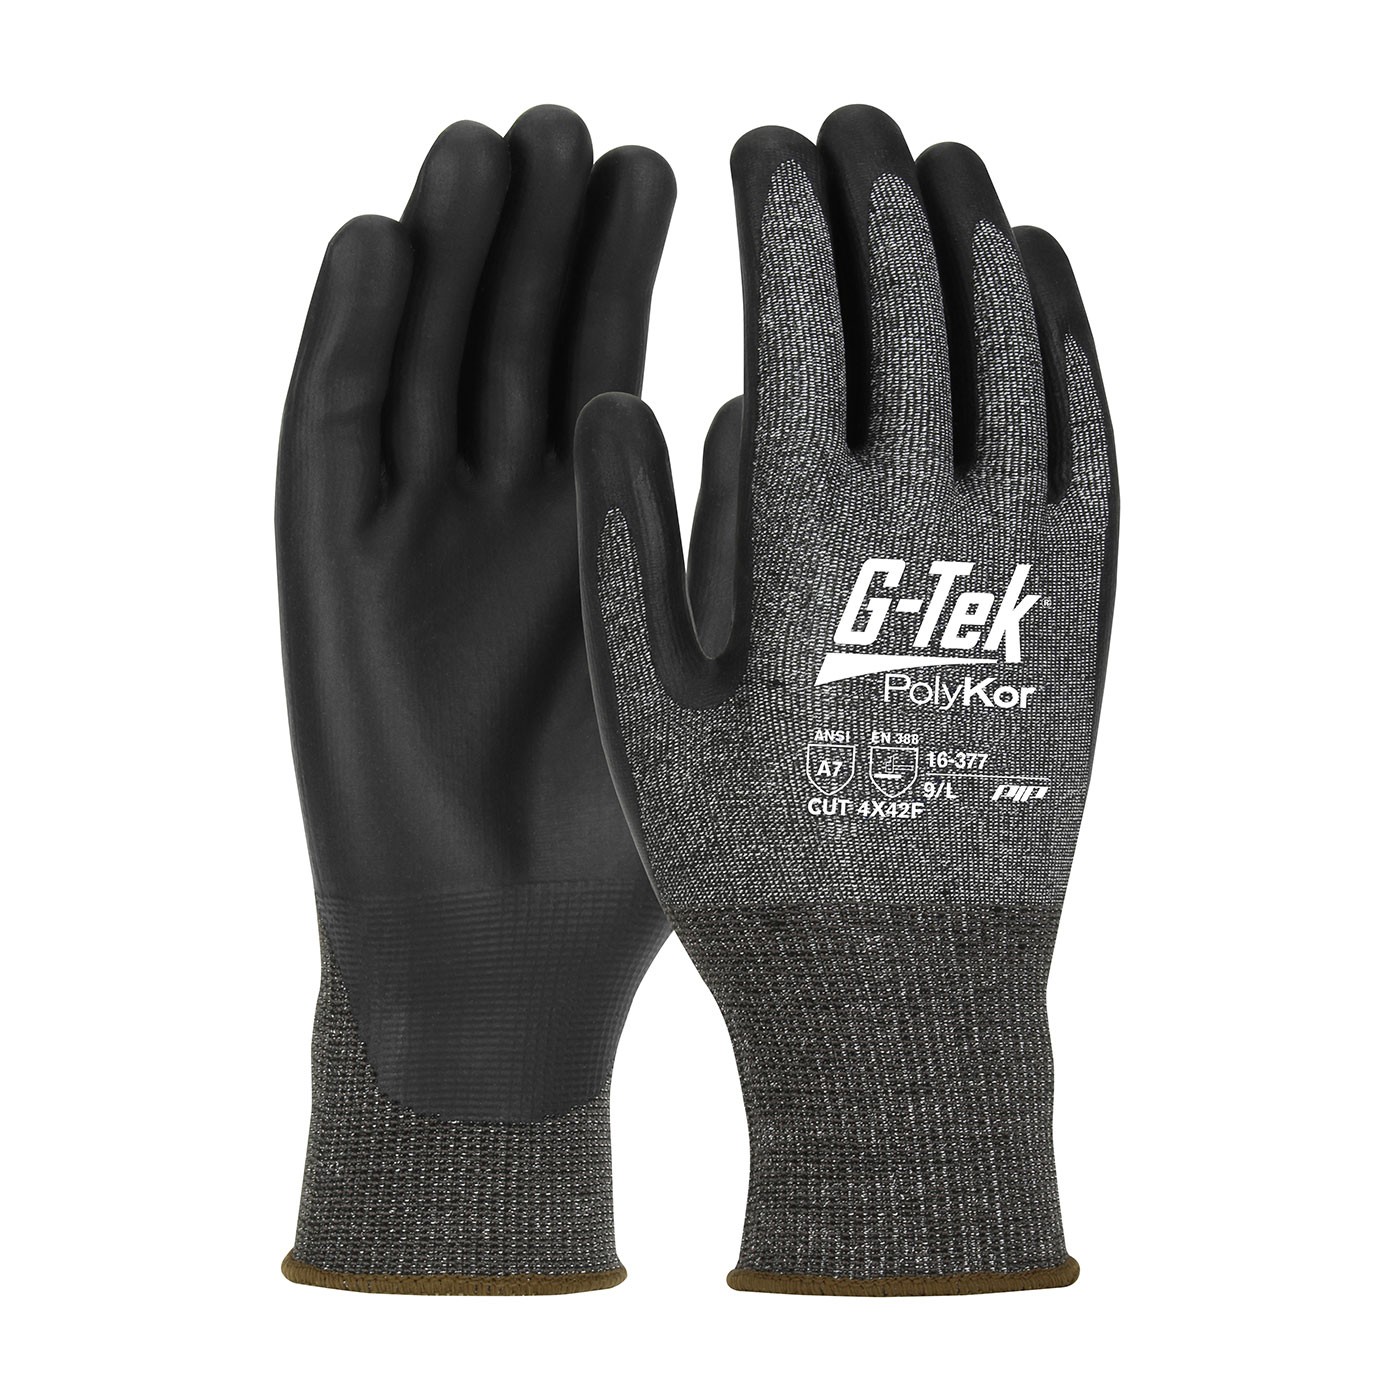 G-Tek® PolyKor® X7™ Seamless Knit PolyKor® X7™ Blended Glove with NeoFoam® Coated Palm & Fingers - Touchscreen Compatible  (#16-377)